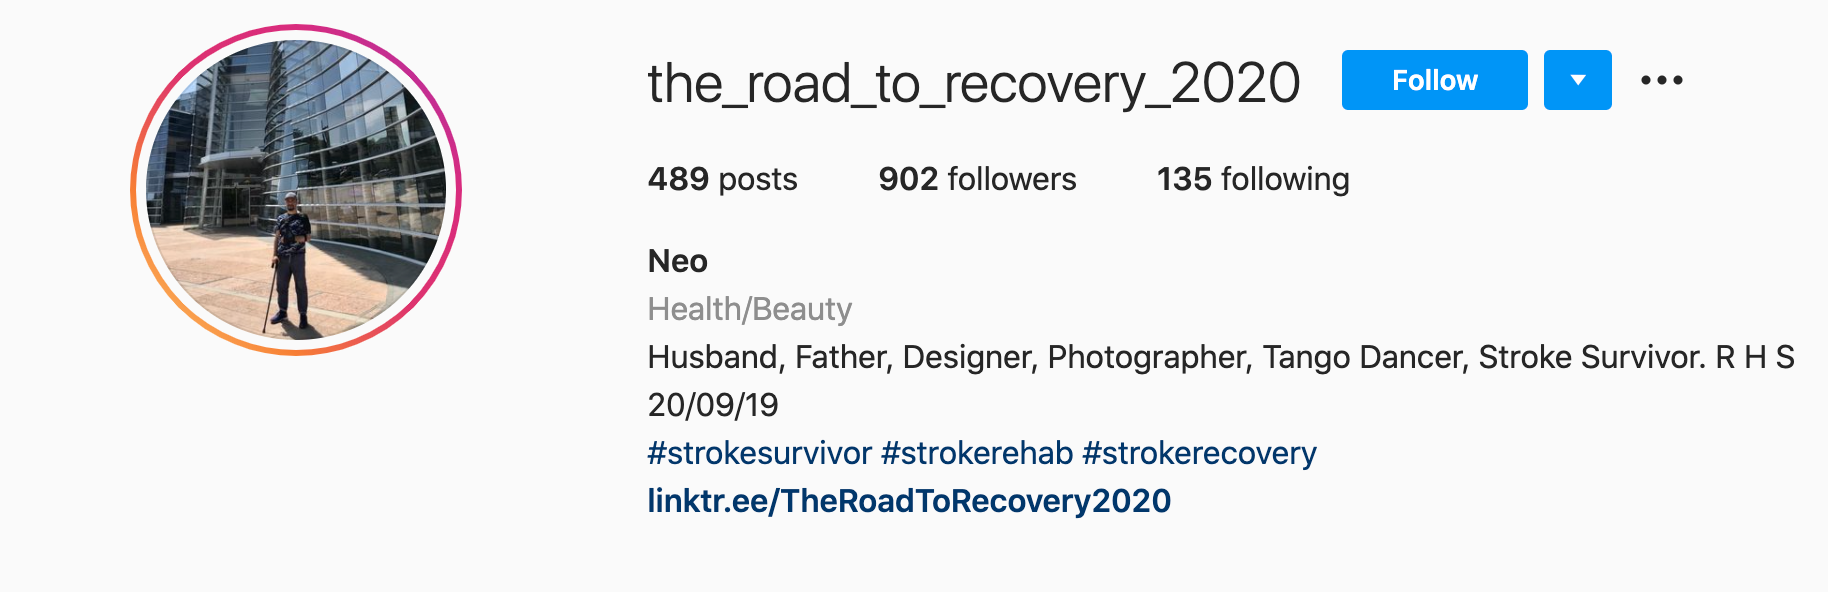 On the Road to Recovery Instagram